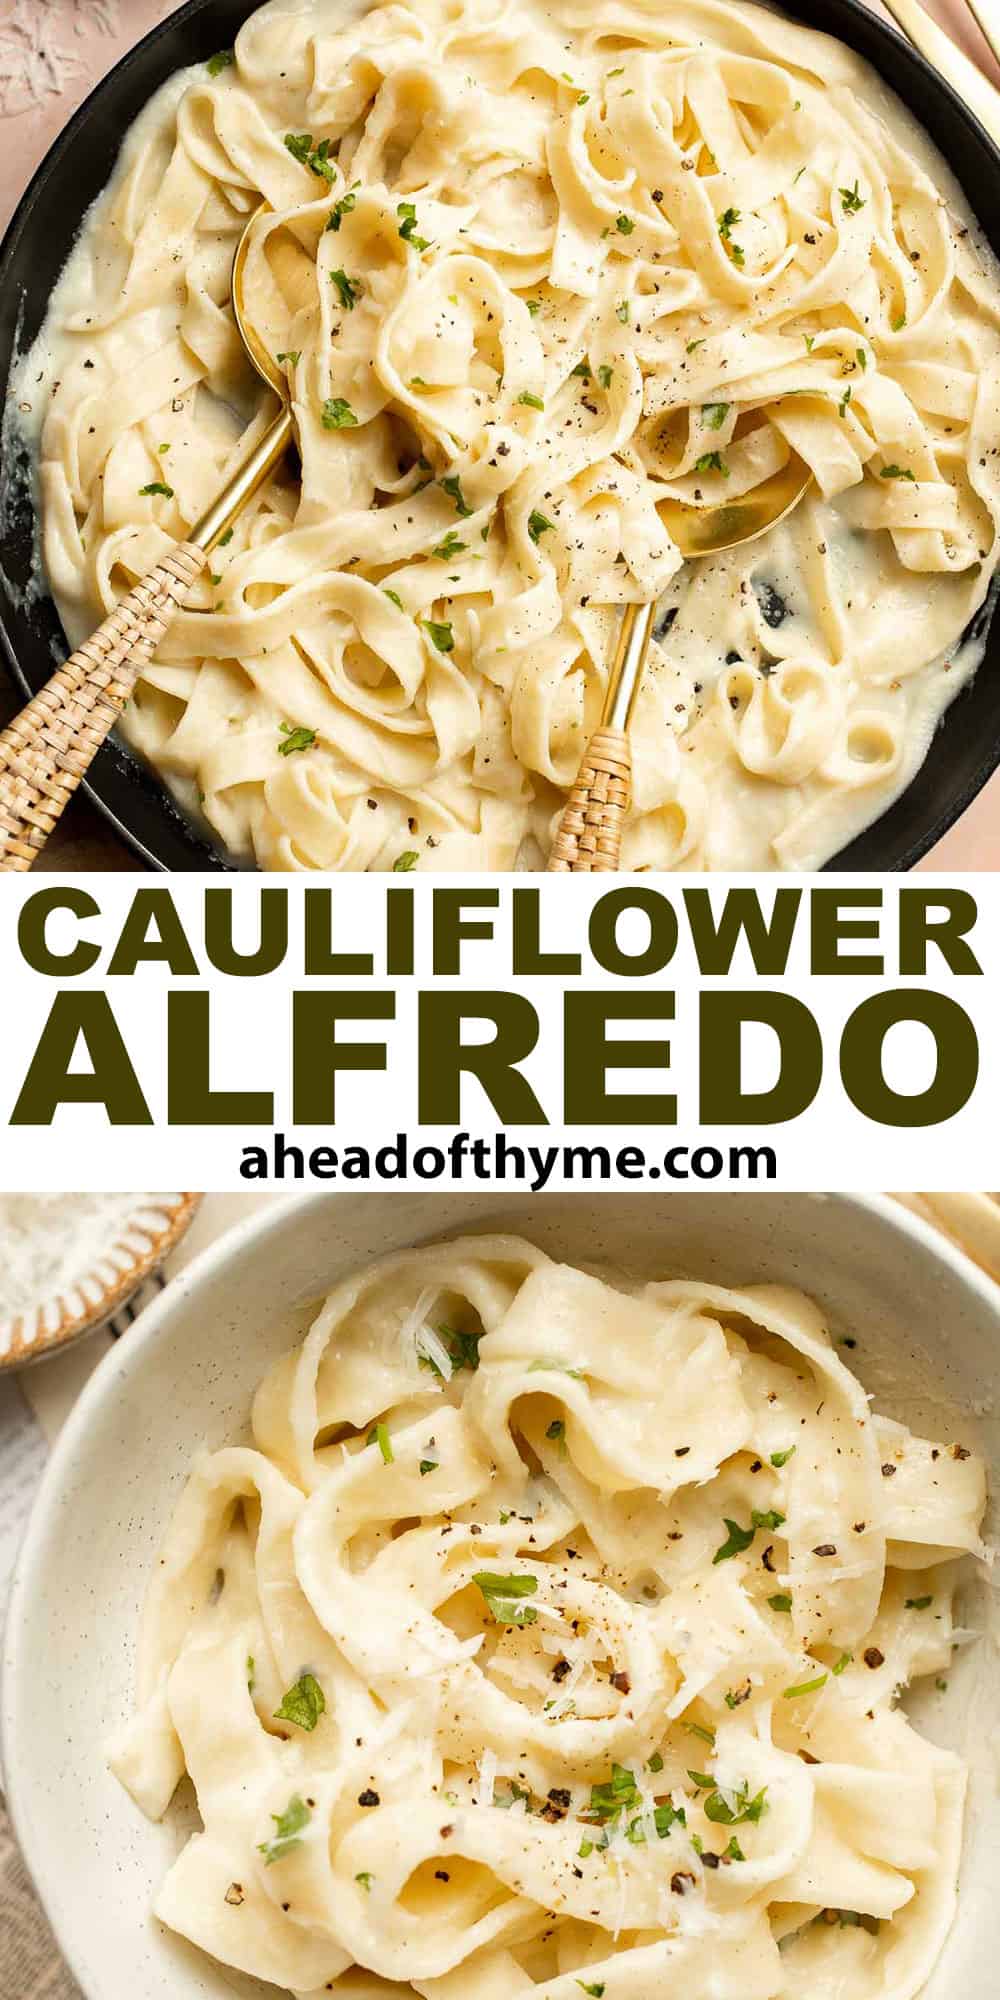 Creamy Cauliflower Alfredo is the perfect way to enjoy your favorite comfort food dinner while sneaking in extra veggies. It tastes like the real thing! | aheadofthyme.com